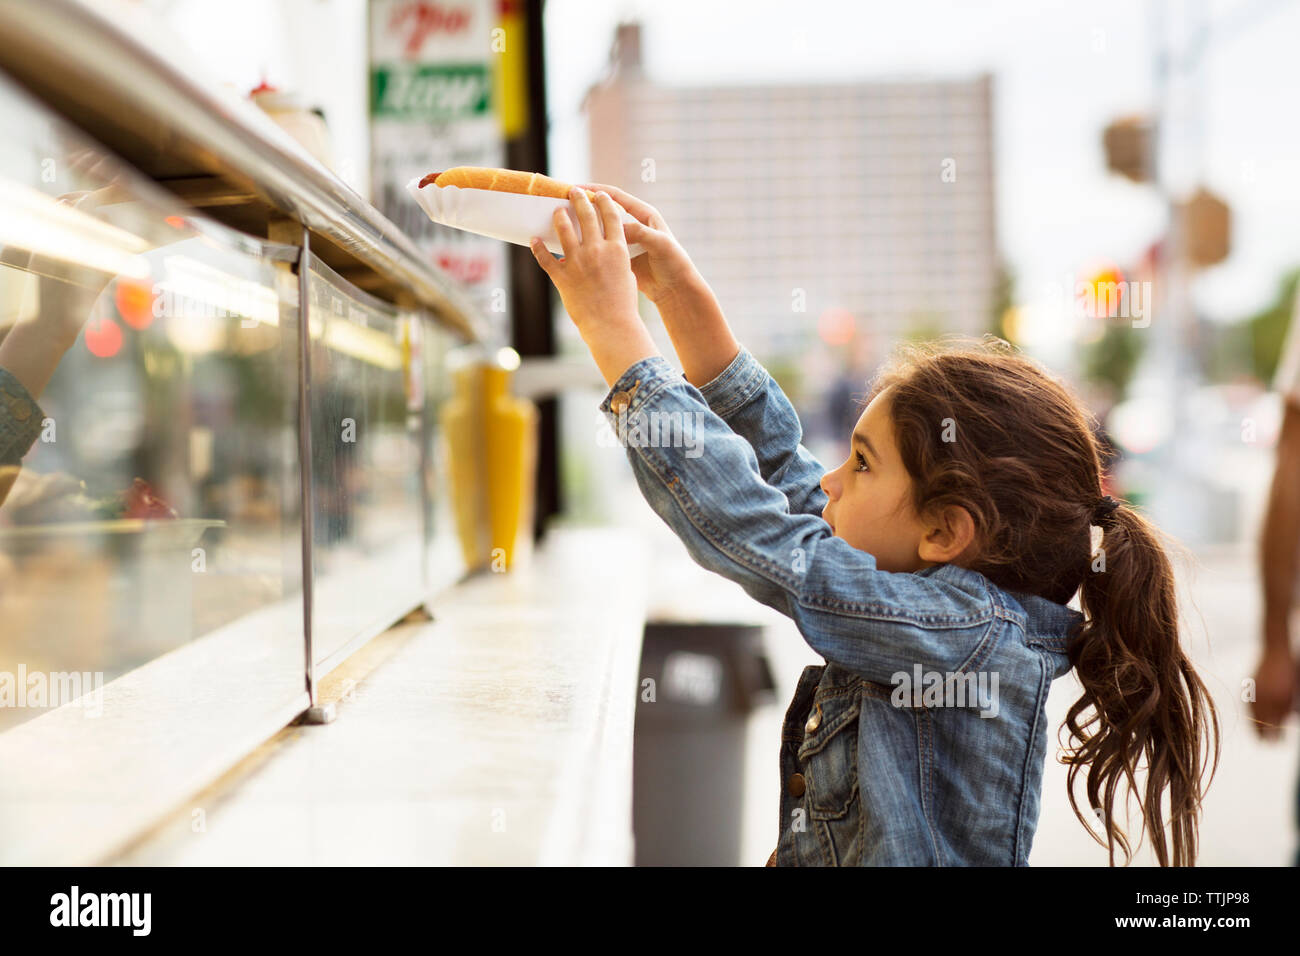 Girl taking hot dog de camion alimentaire Banque D'Images